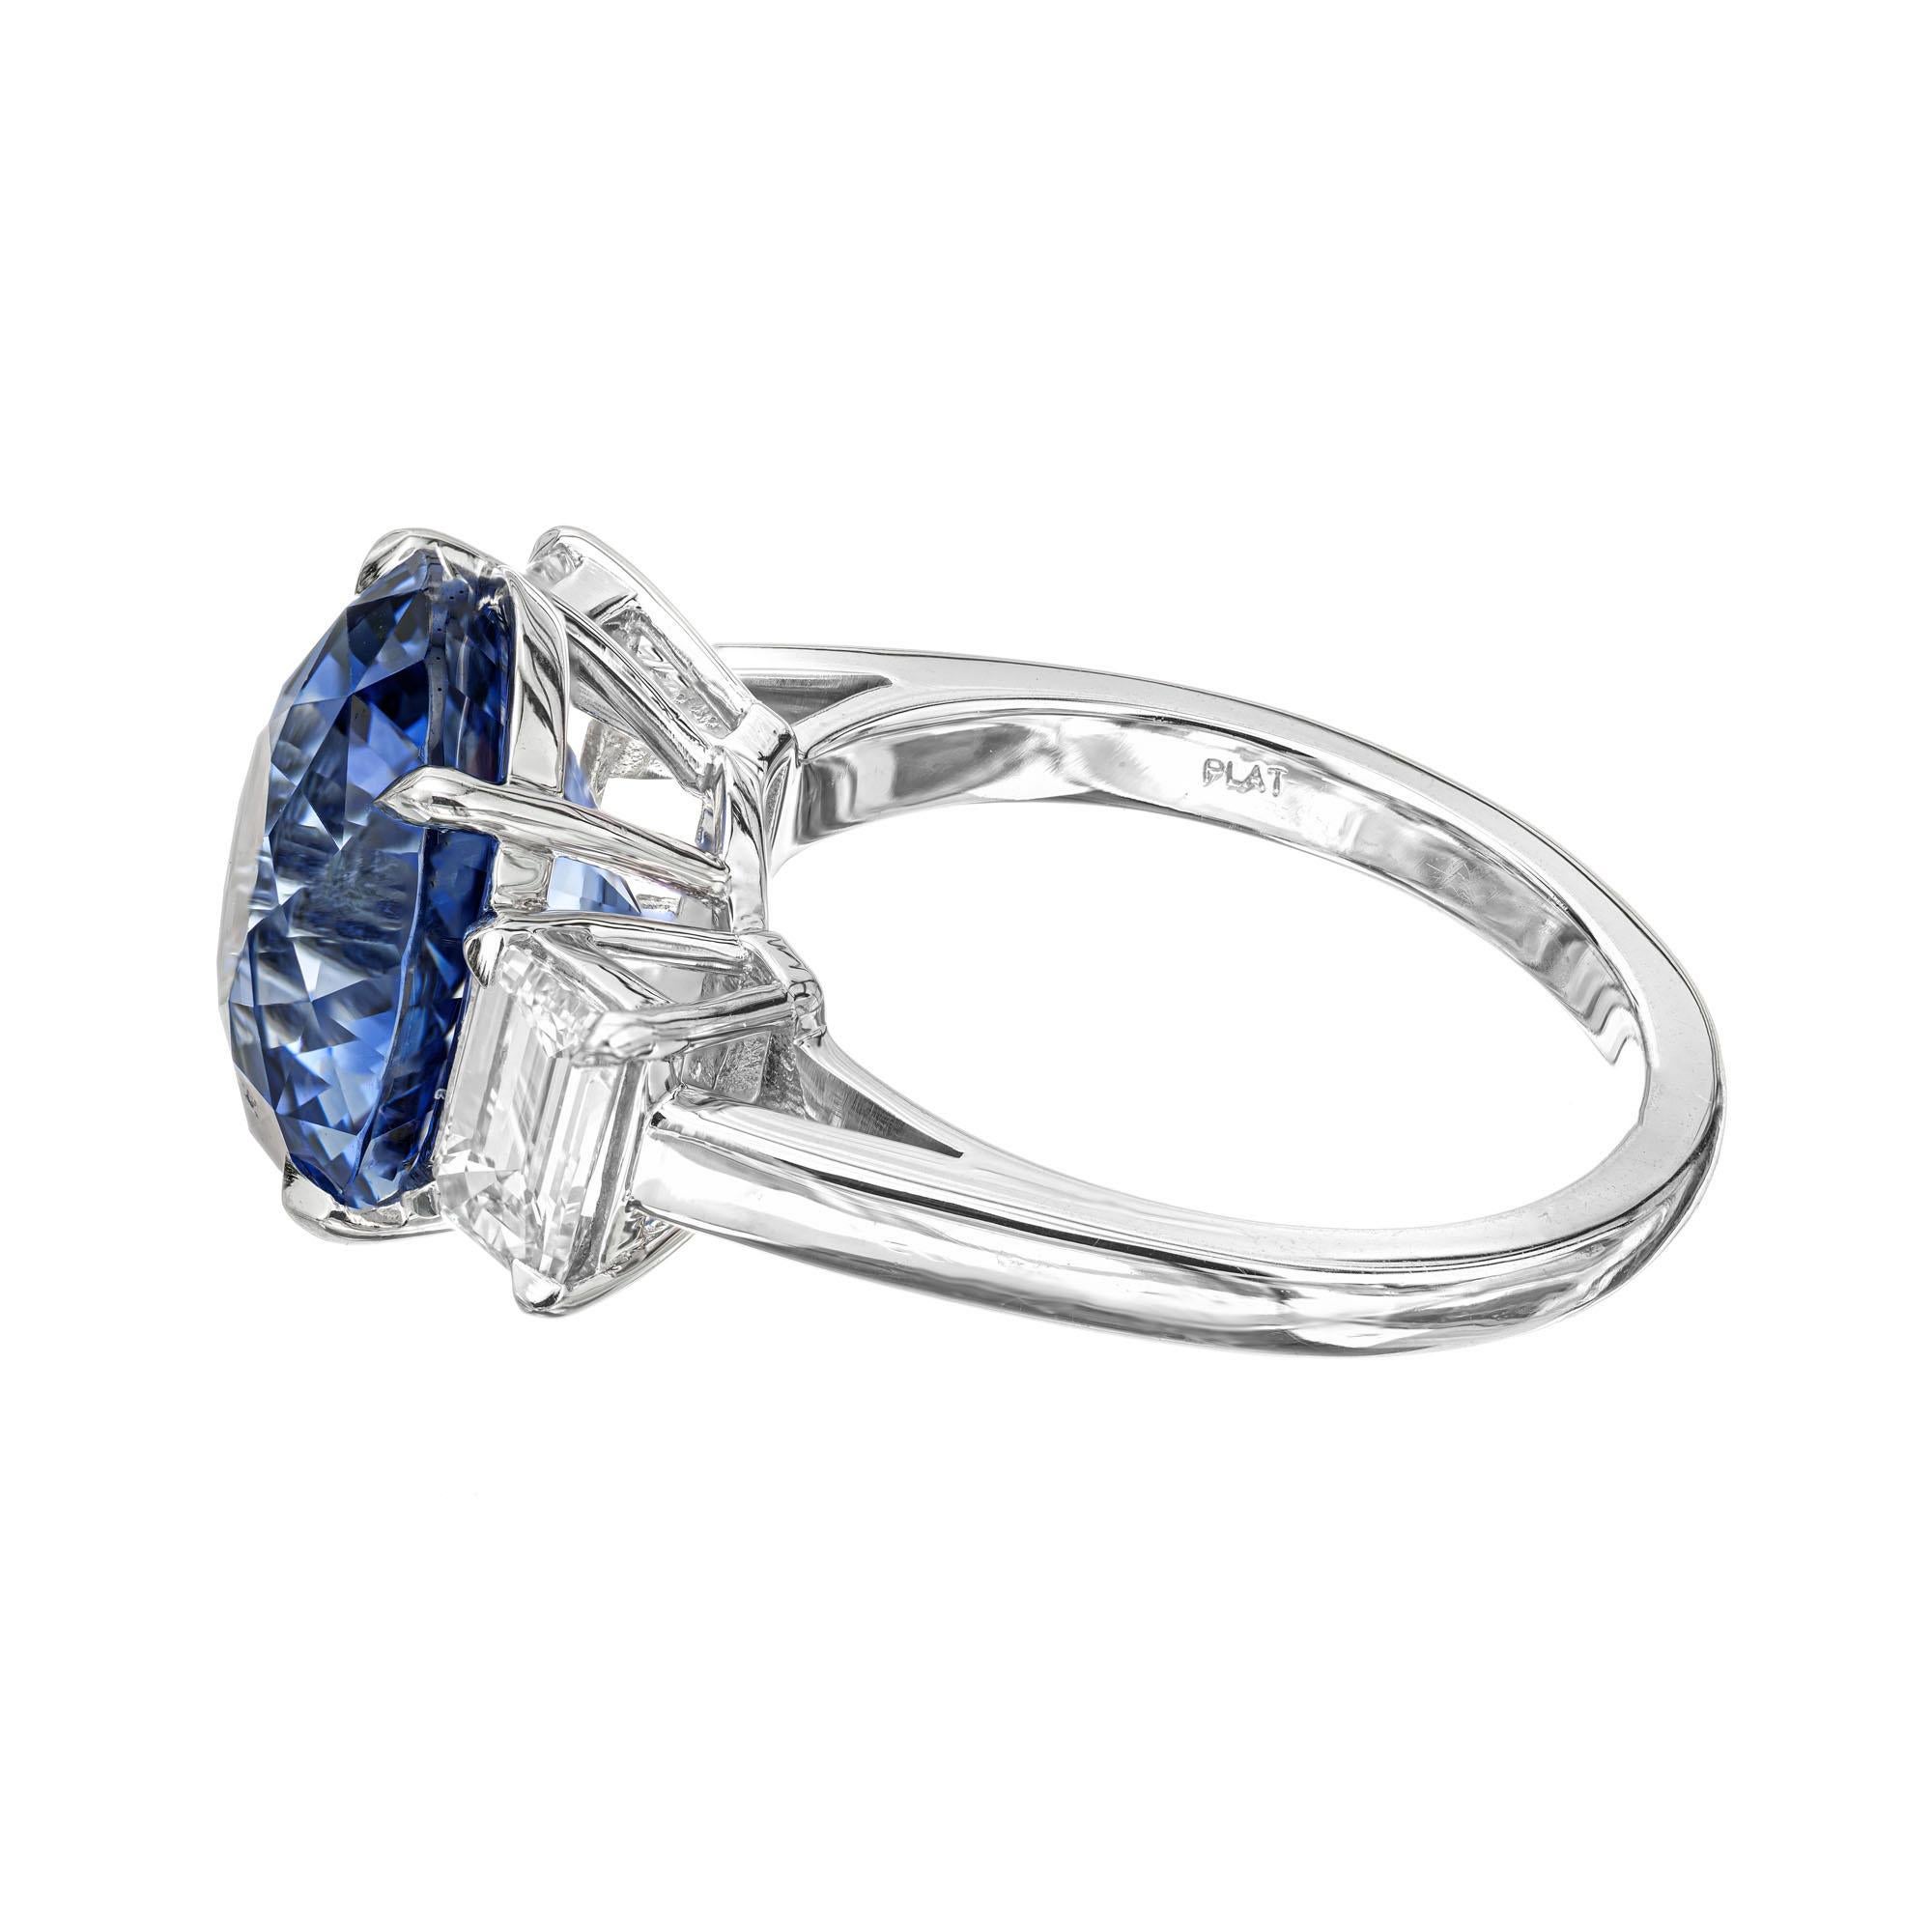 Peter Suchy GIA 8.16 Carat Sapphire Diamond Platinum Three-Stone Engagement Ring In New Condition For Sale In Stamford, CT